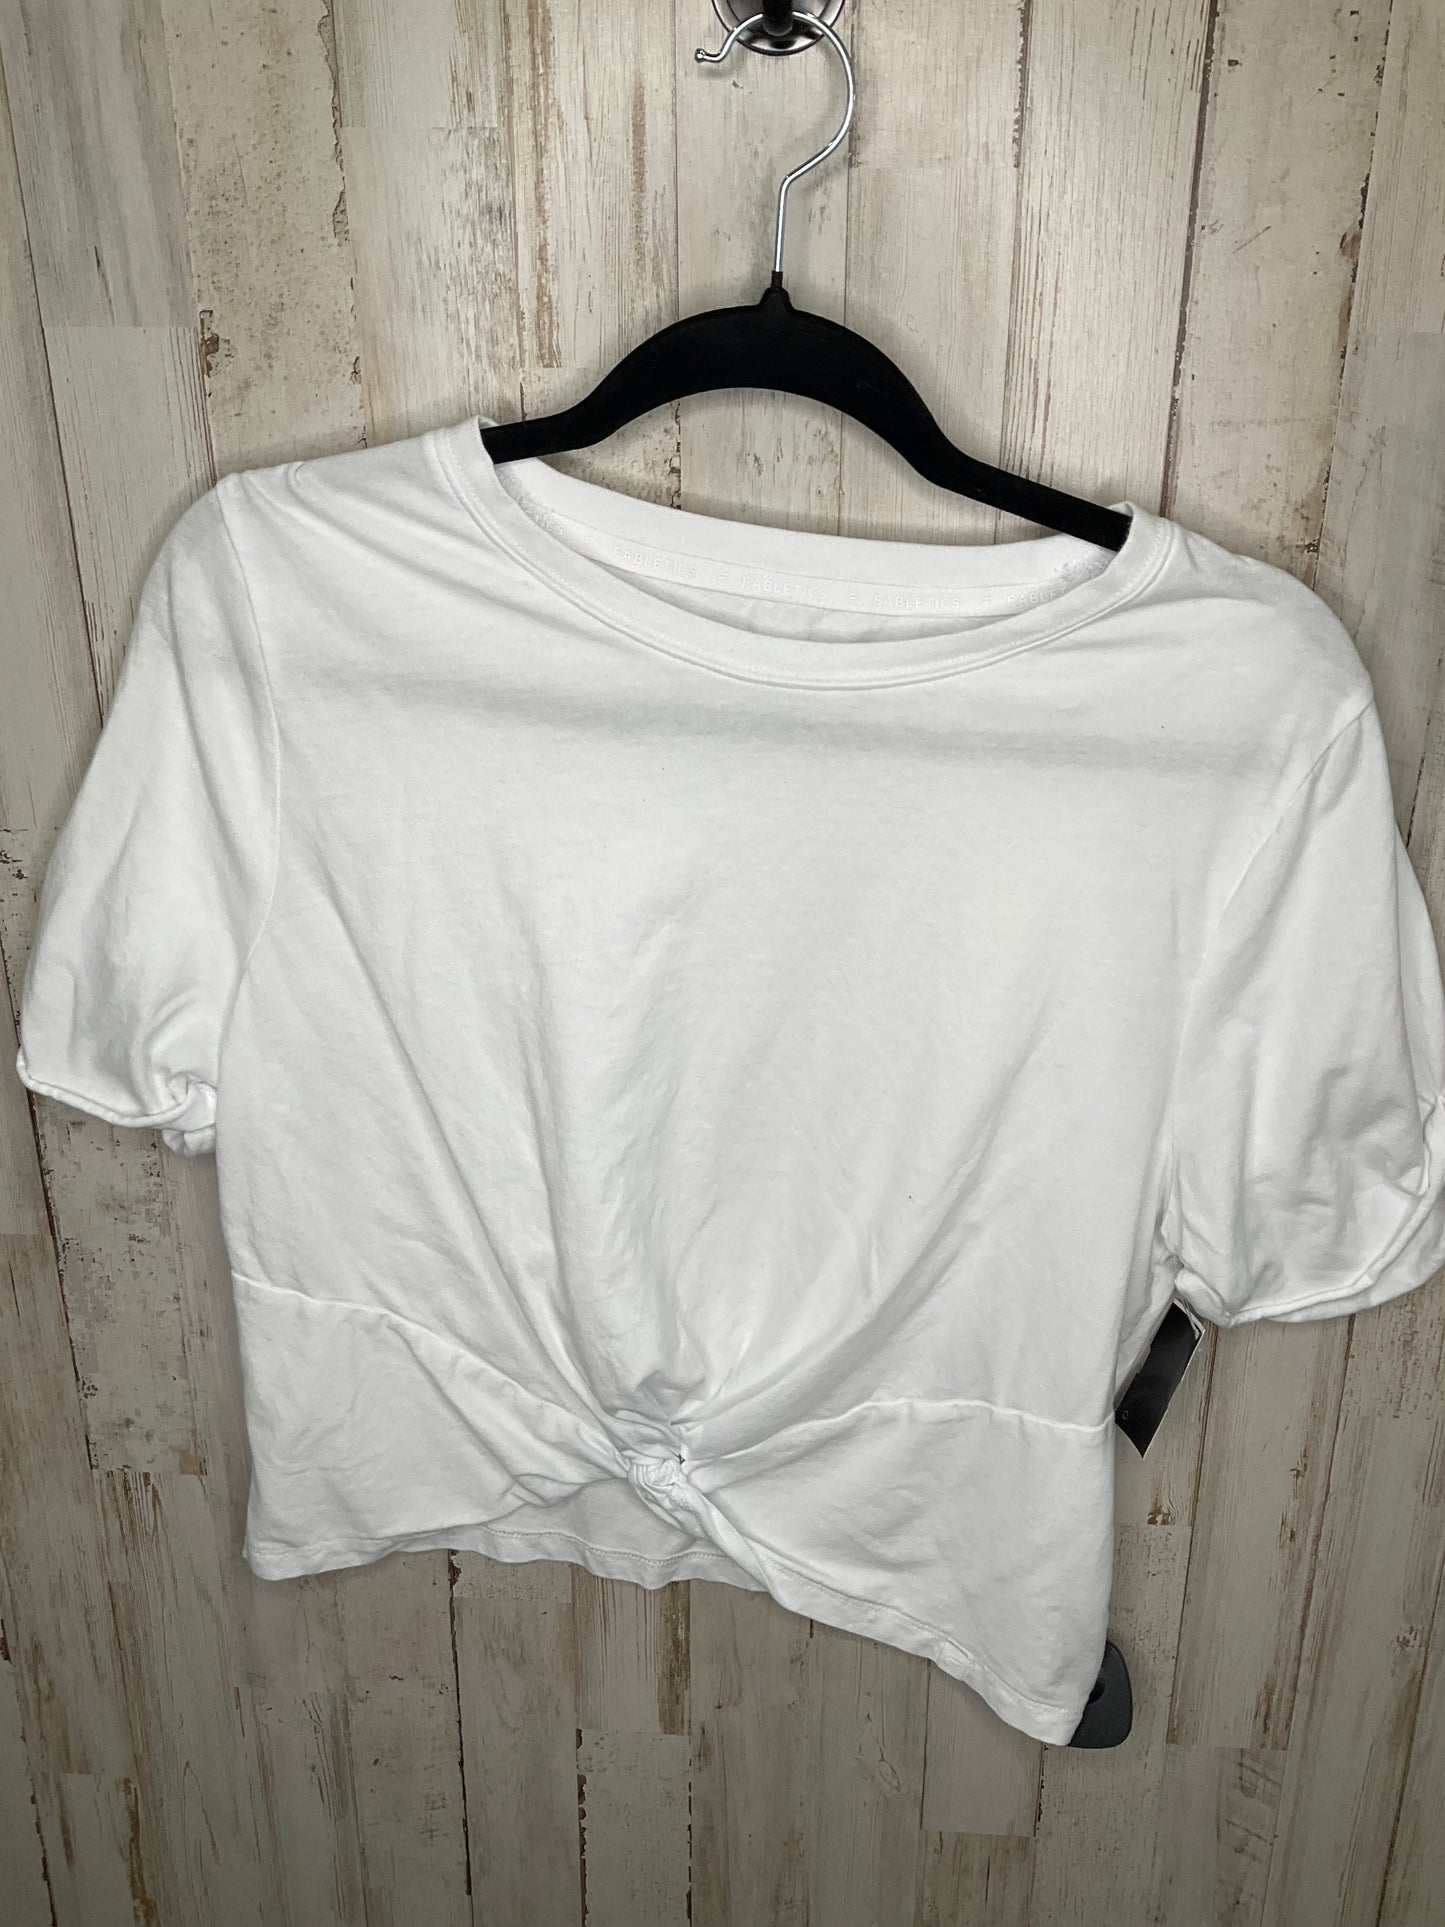 White Athletic Top Short Sleeve Fabletics, Size L